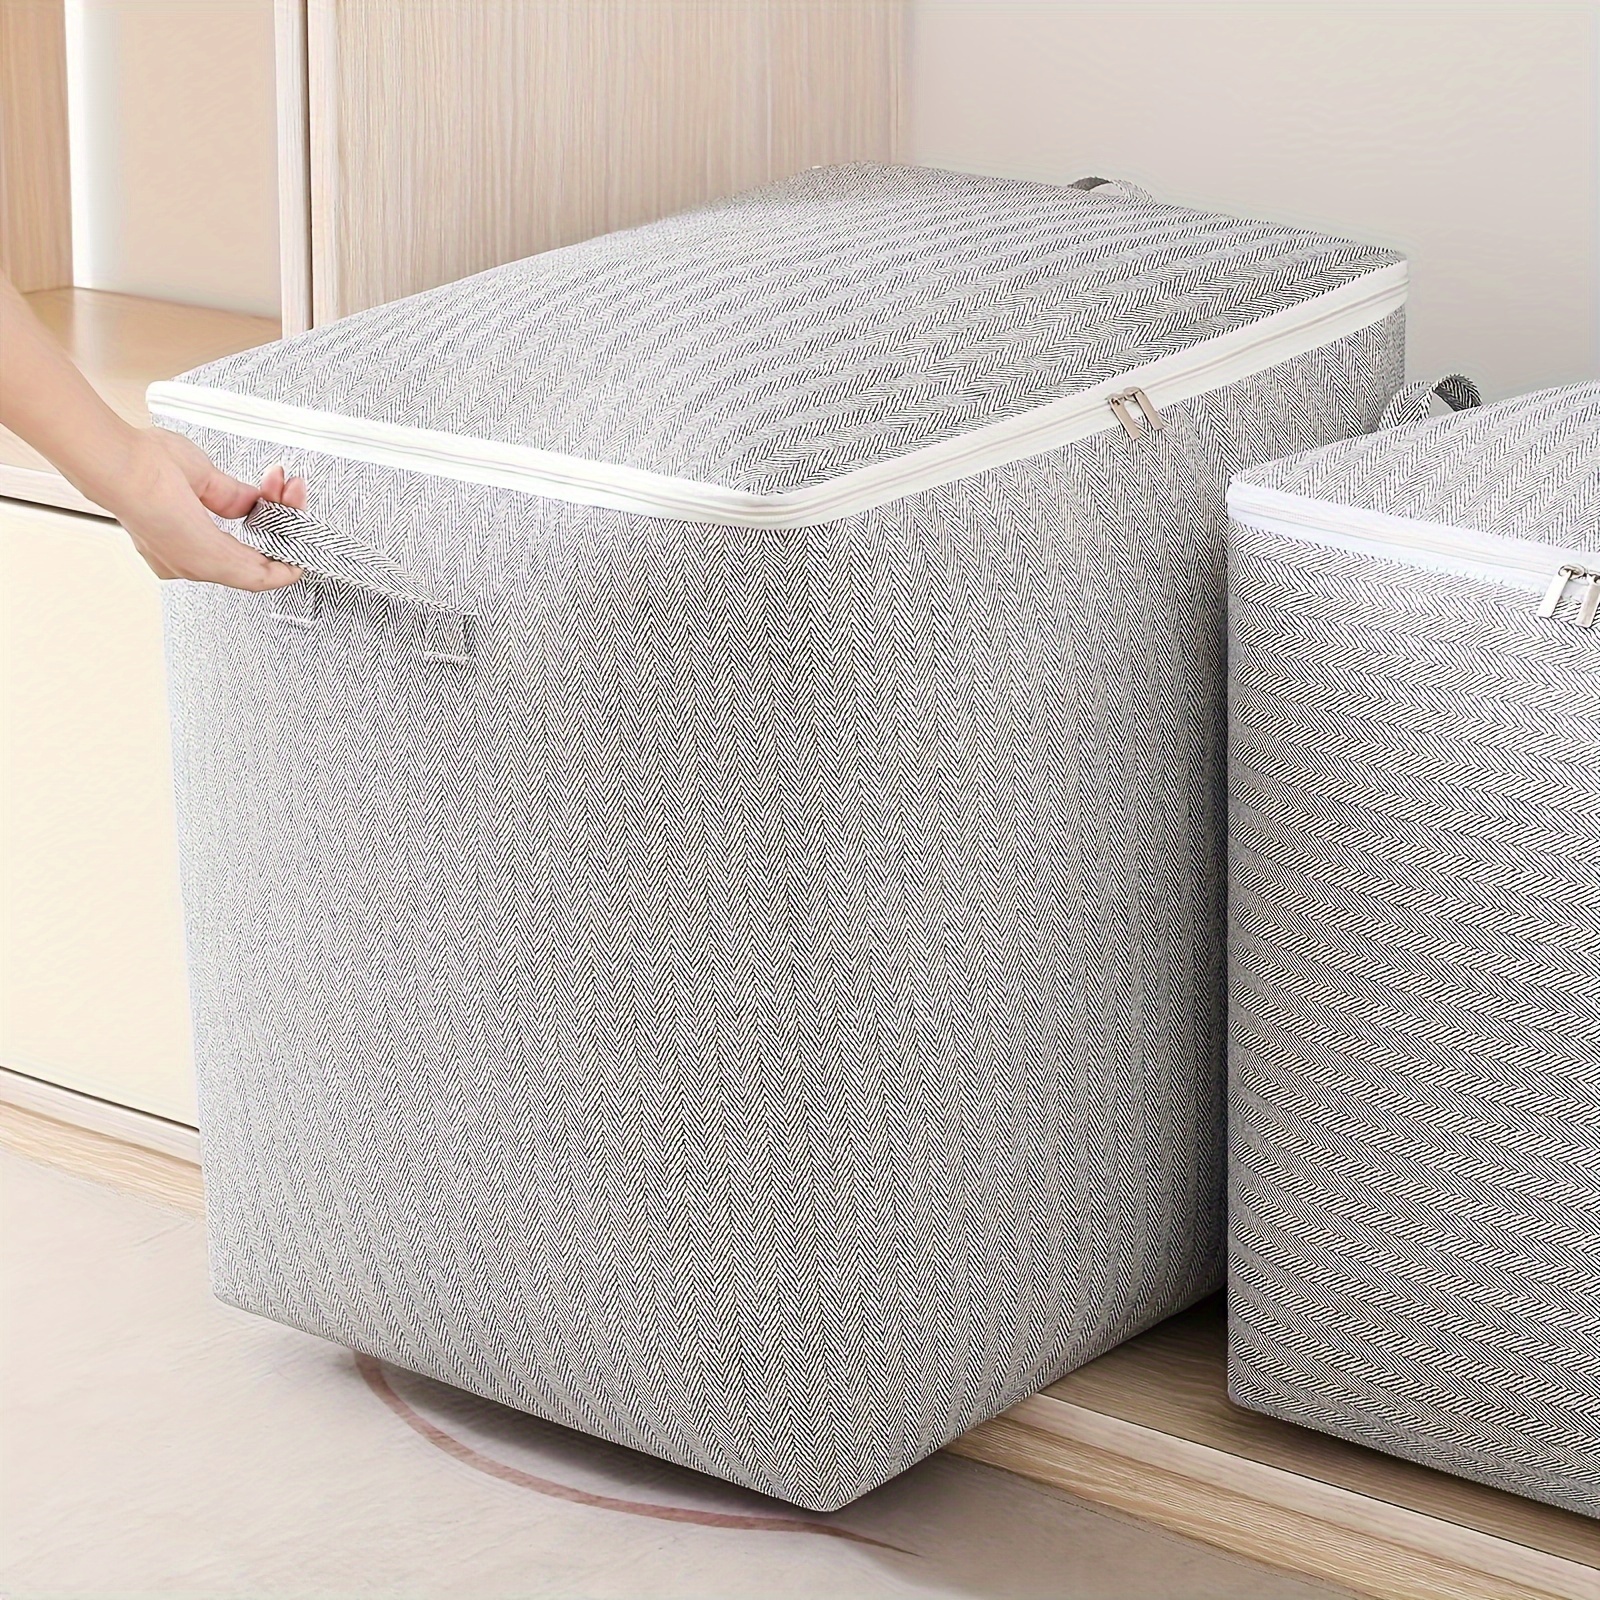 

Classic Fabric Storage Bin: Large Capacity, Multi-purpose, Suitable For Bedroom Closet Organization - Durable, Portable, And Weather-resistant